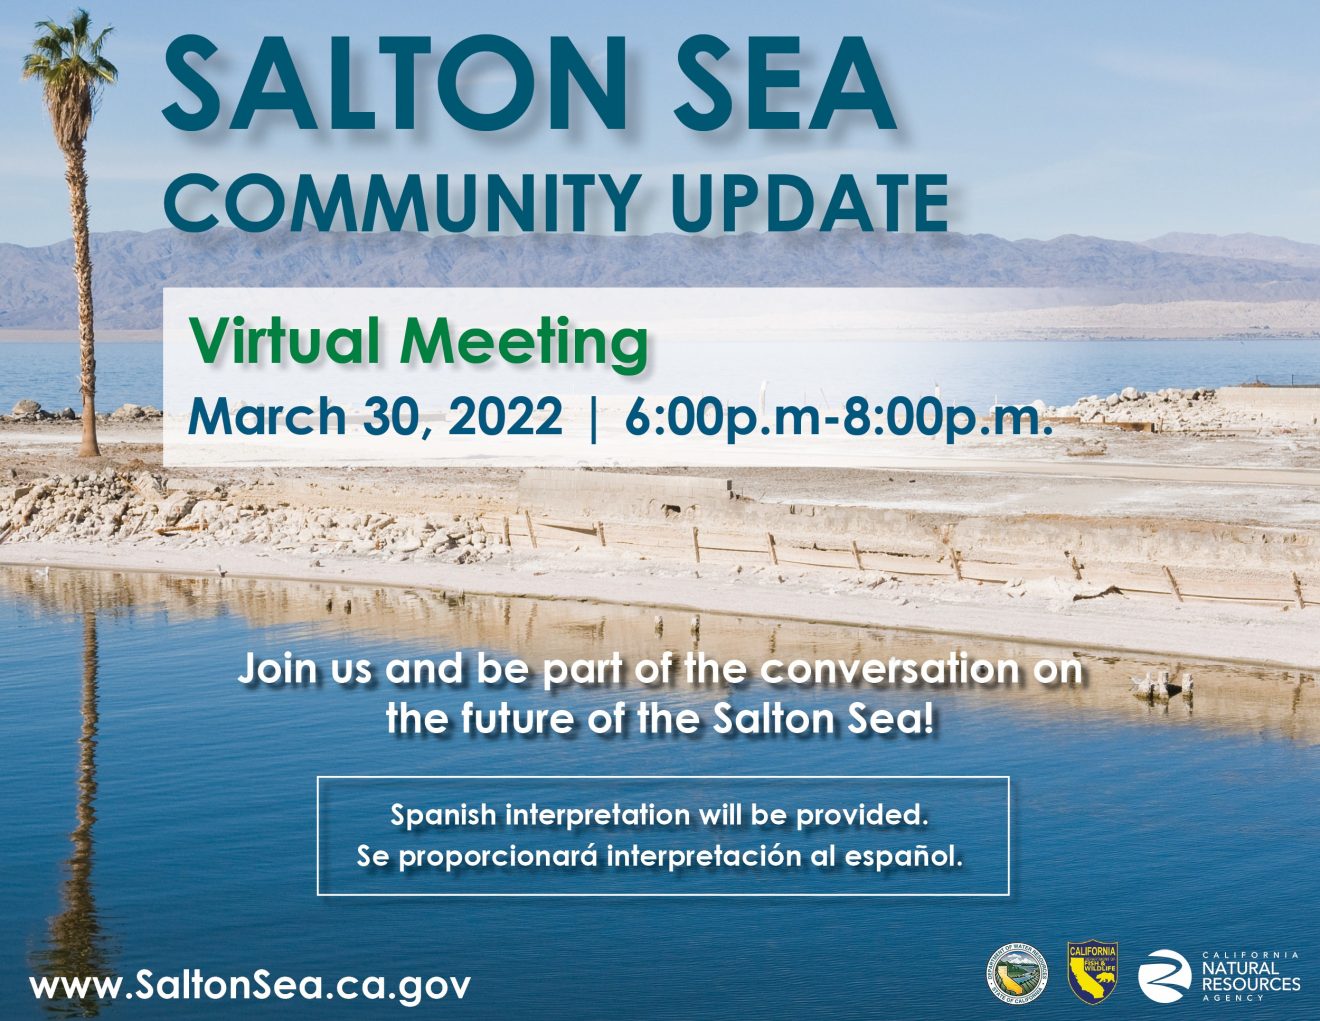 Salton Sea Management Program Holding A Virtual Meeting on Wednesday, March 30th